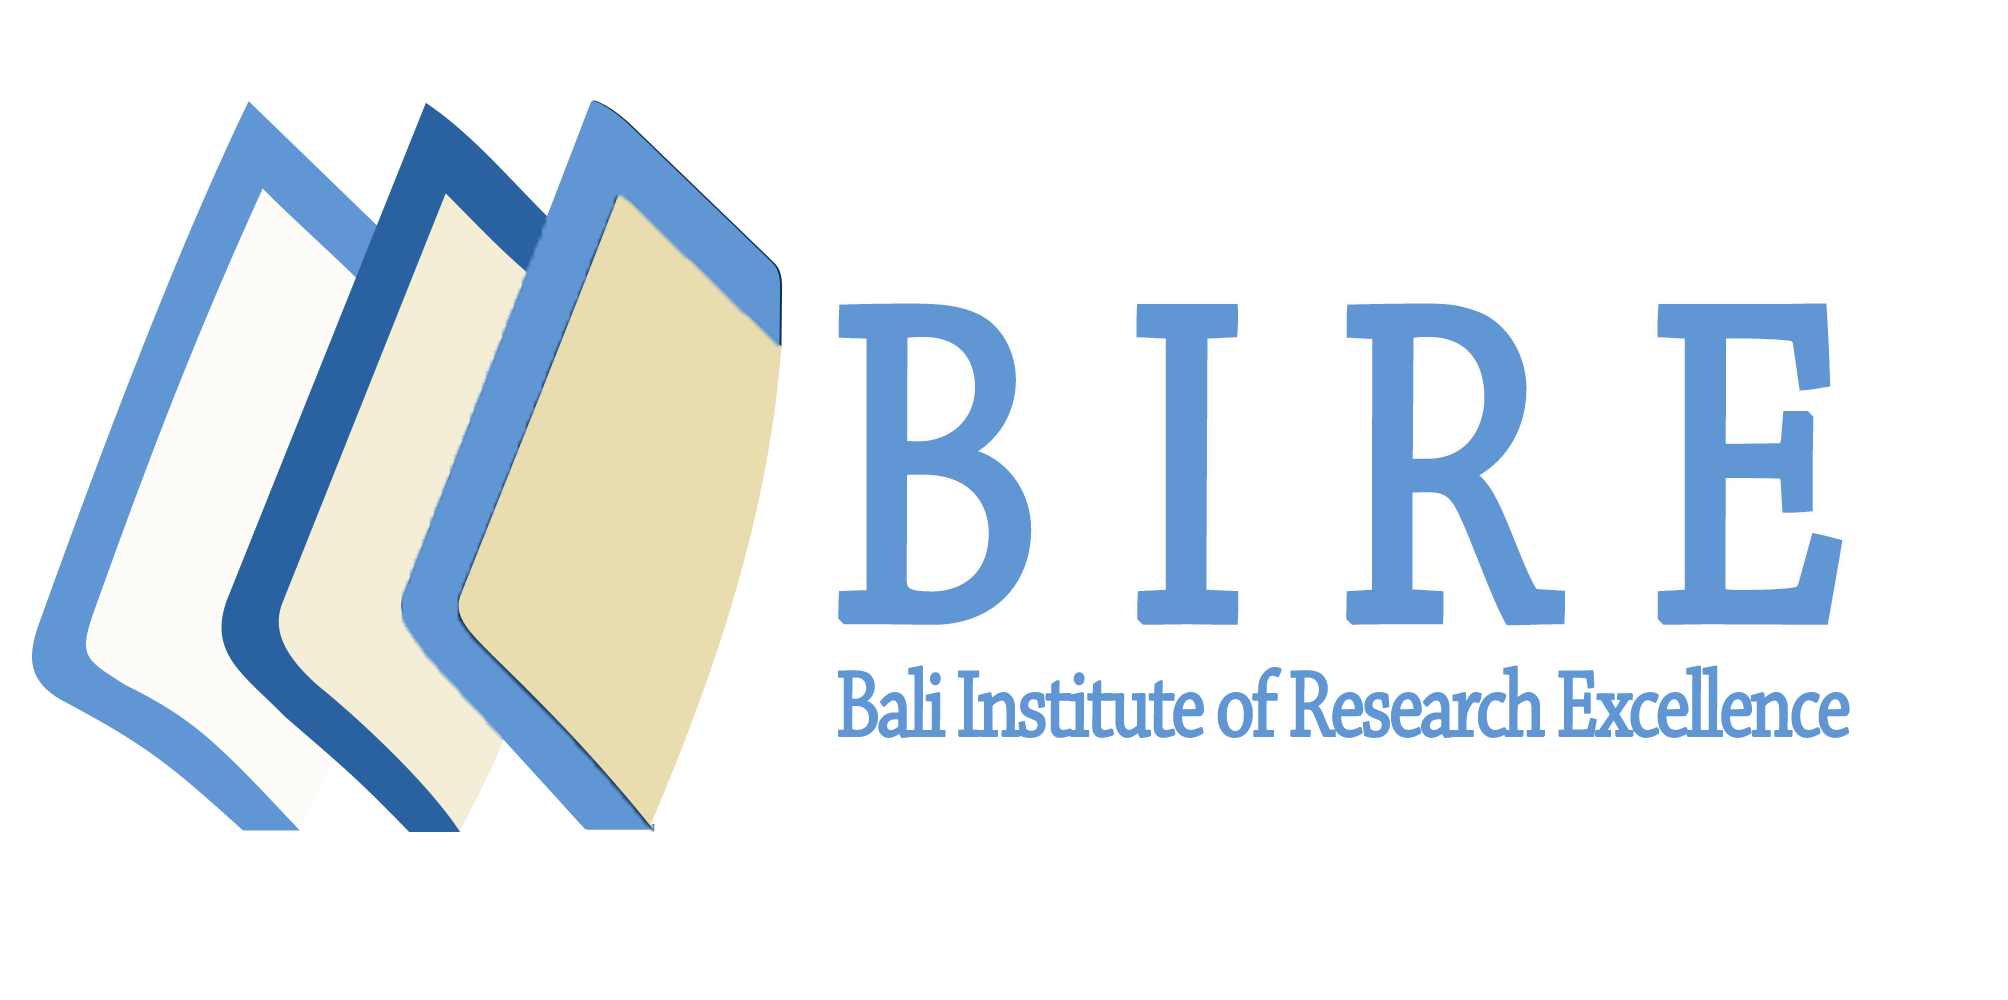 3rd International Conference on Research Perspectives on Entrepreneurship Education, Business Management and Social Sciences (EBMS)